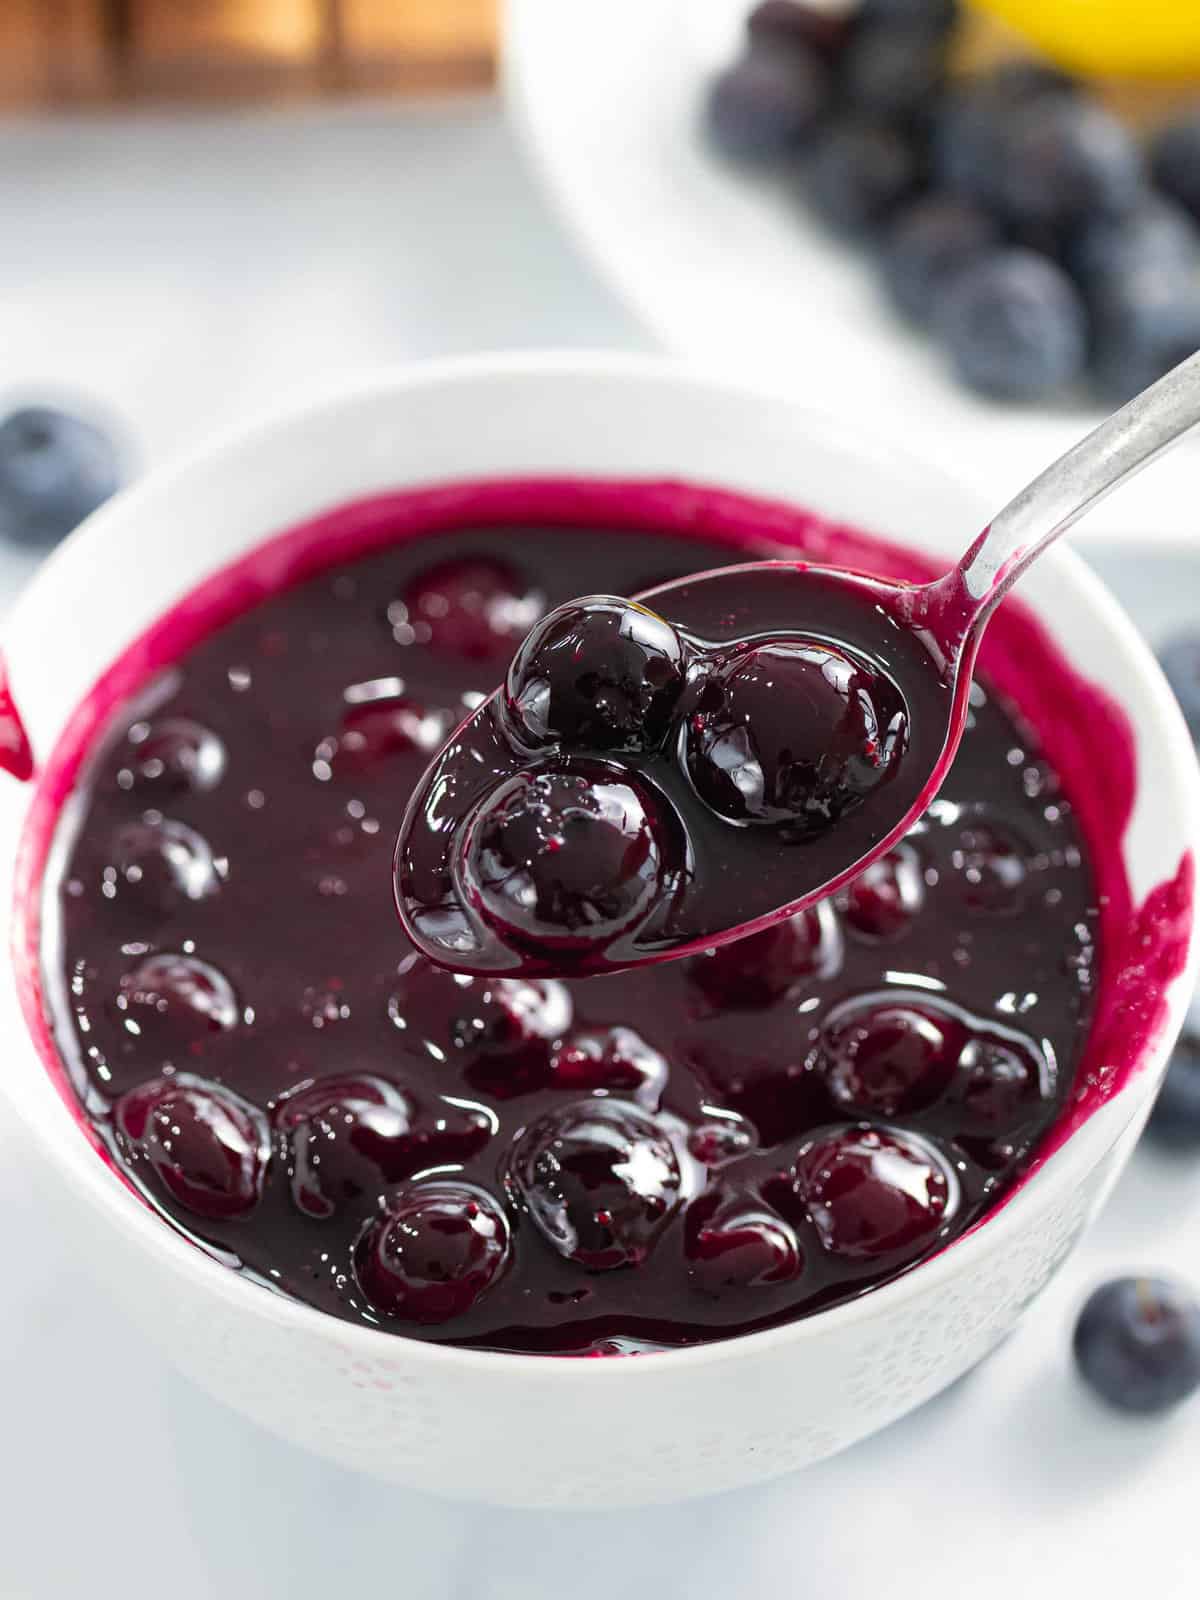 Blueberry compote in a white bowl.